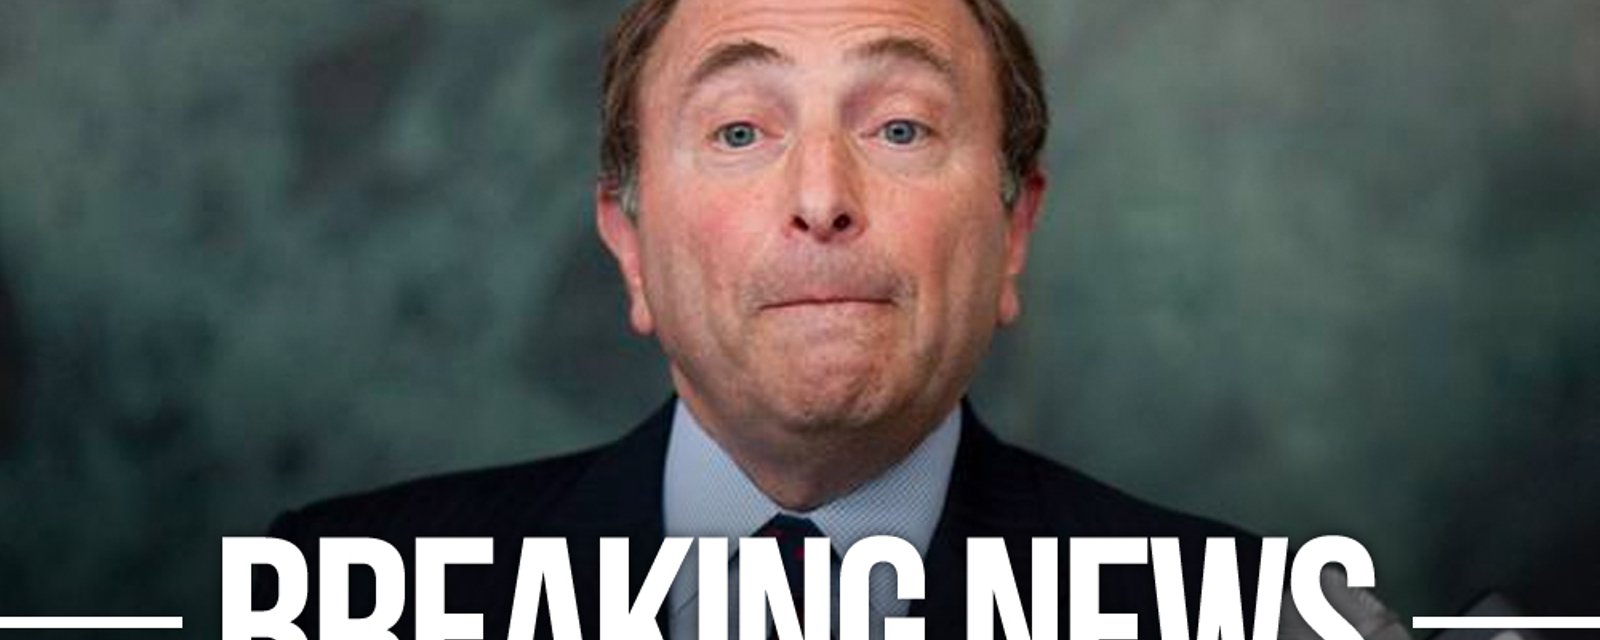 Did Gary Bettman finally admit defeat after giving in to NHLPA?